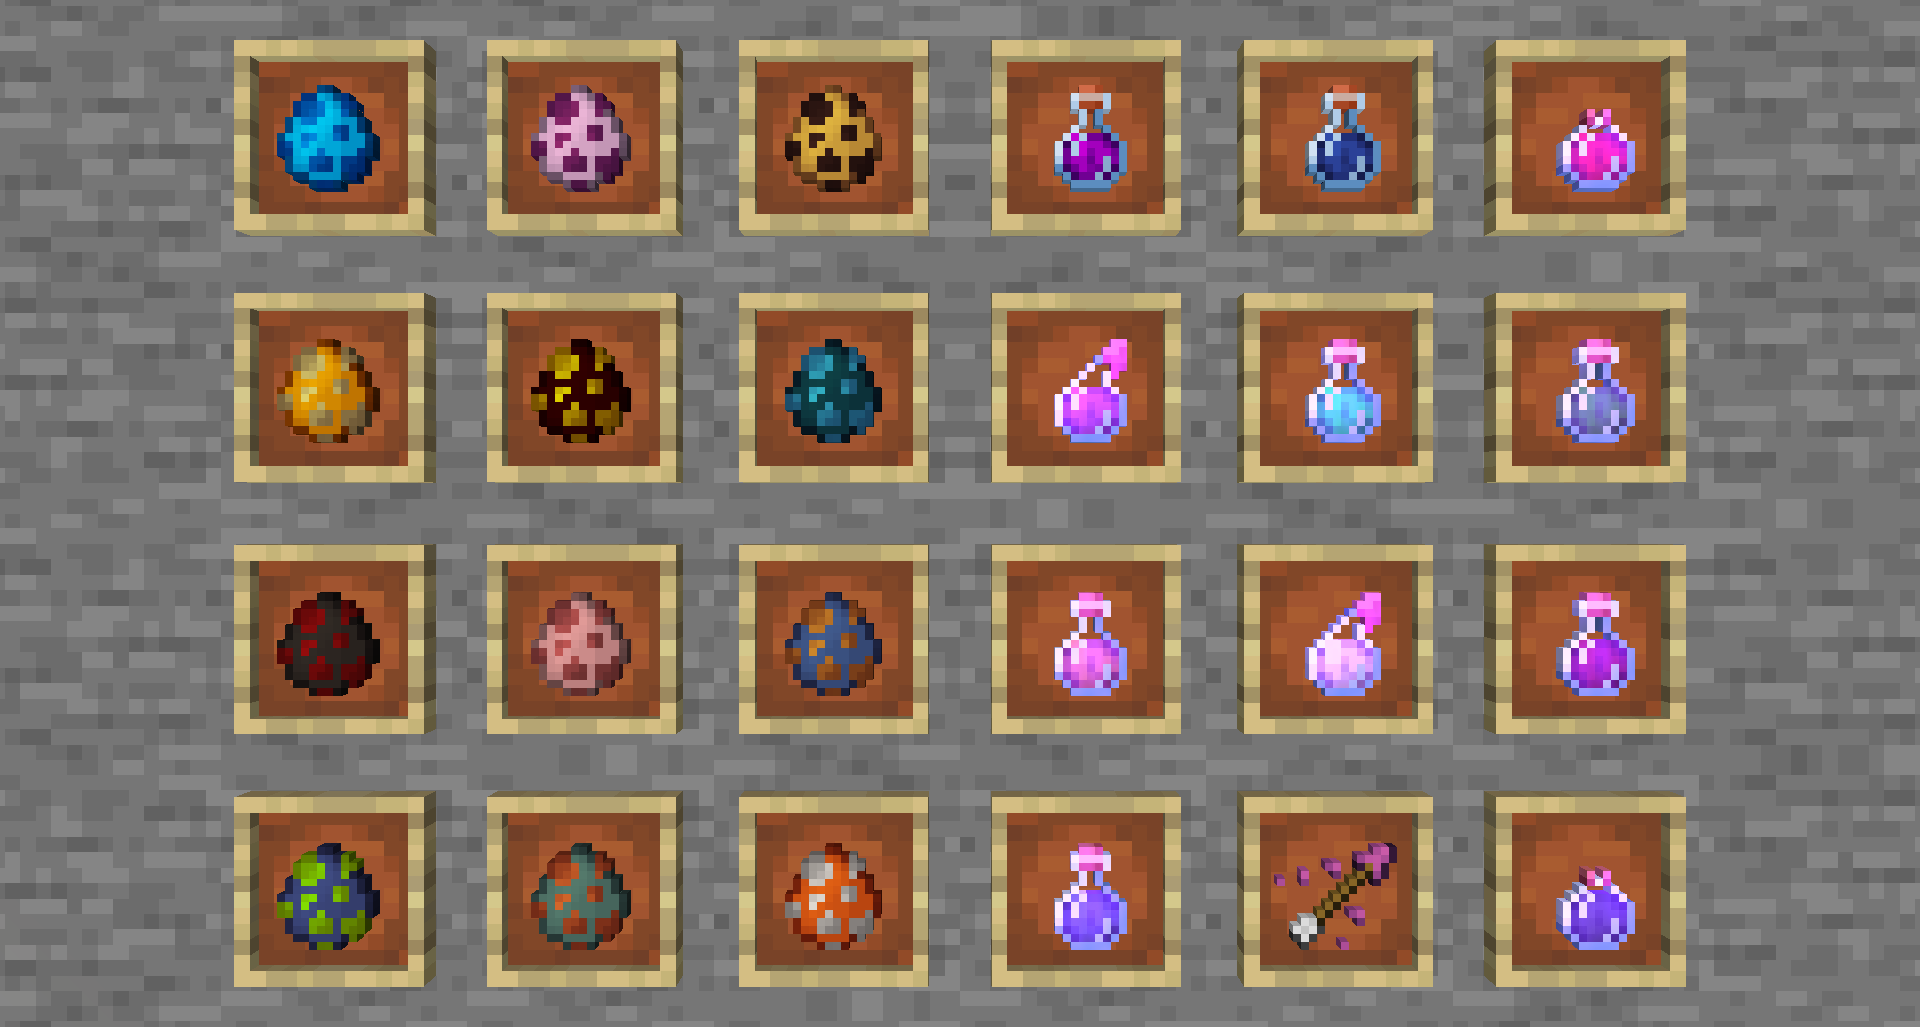 Eggs and potions